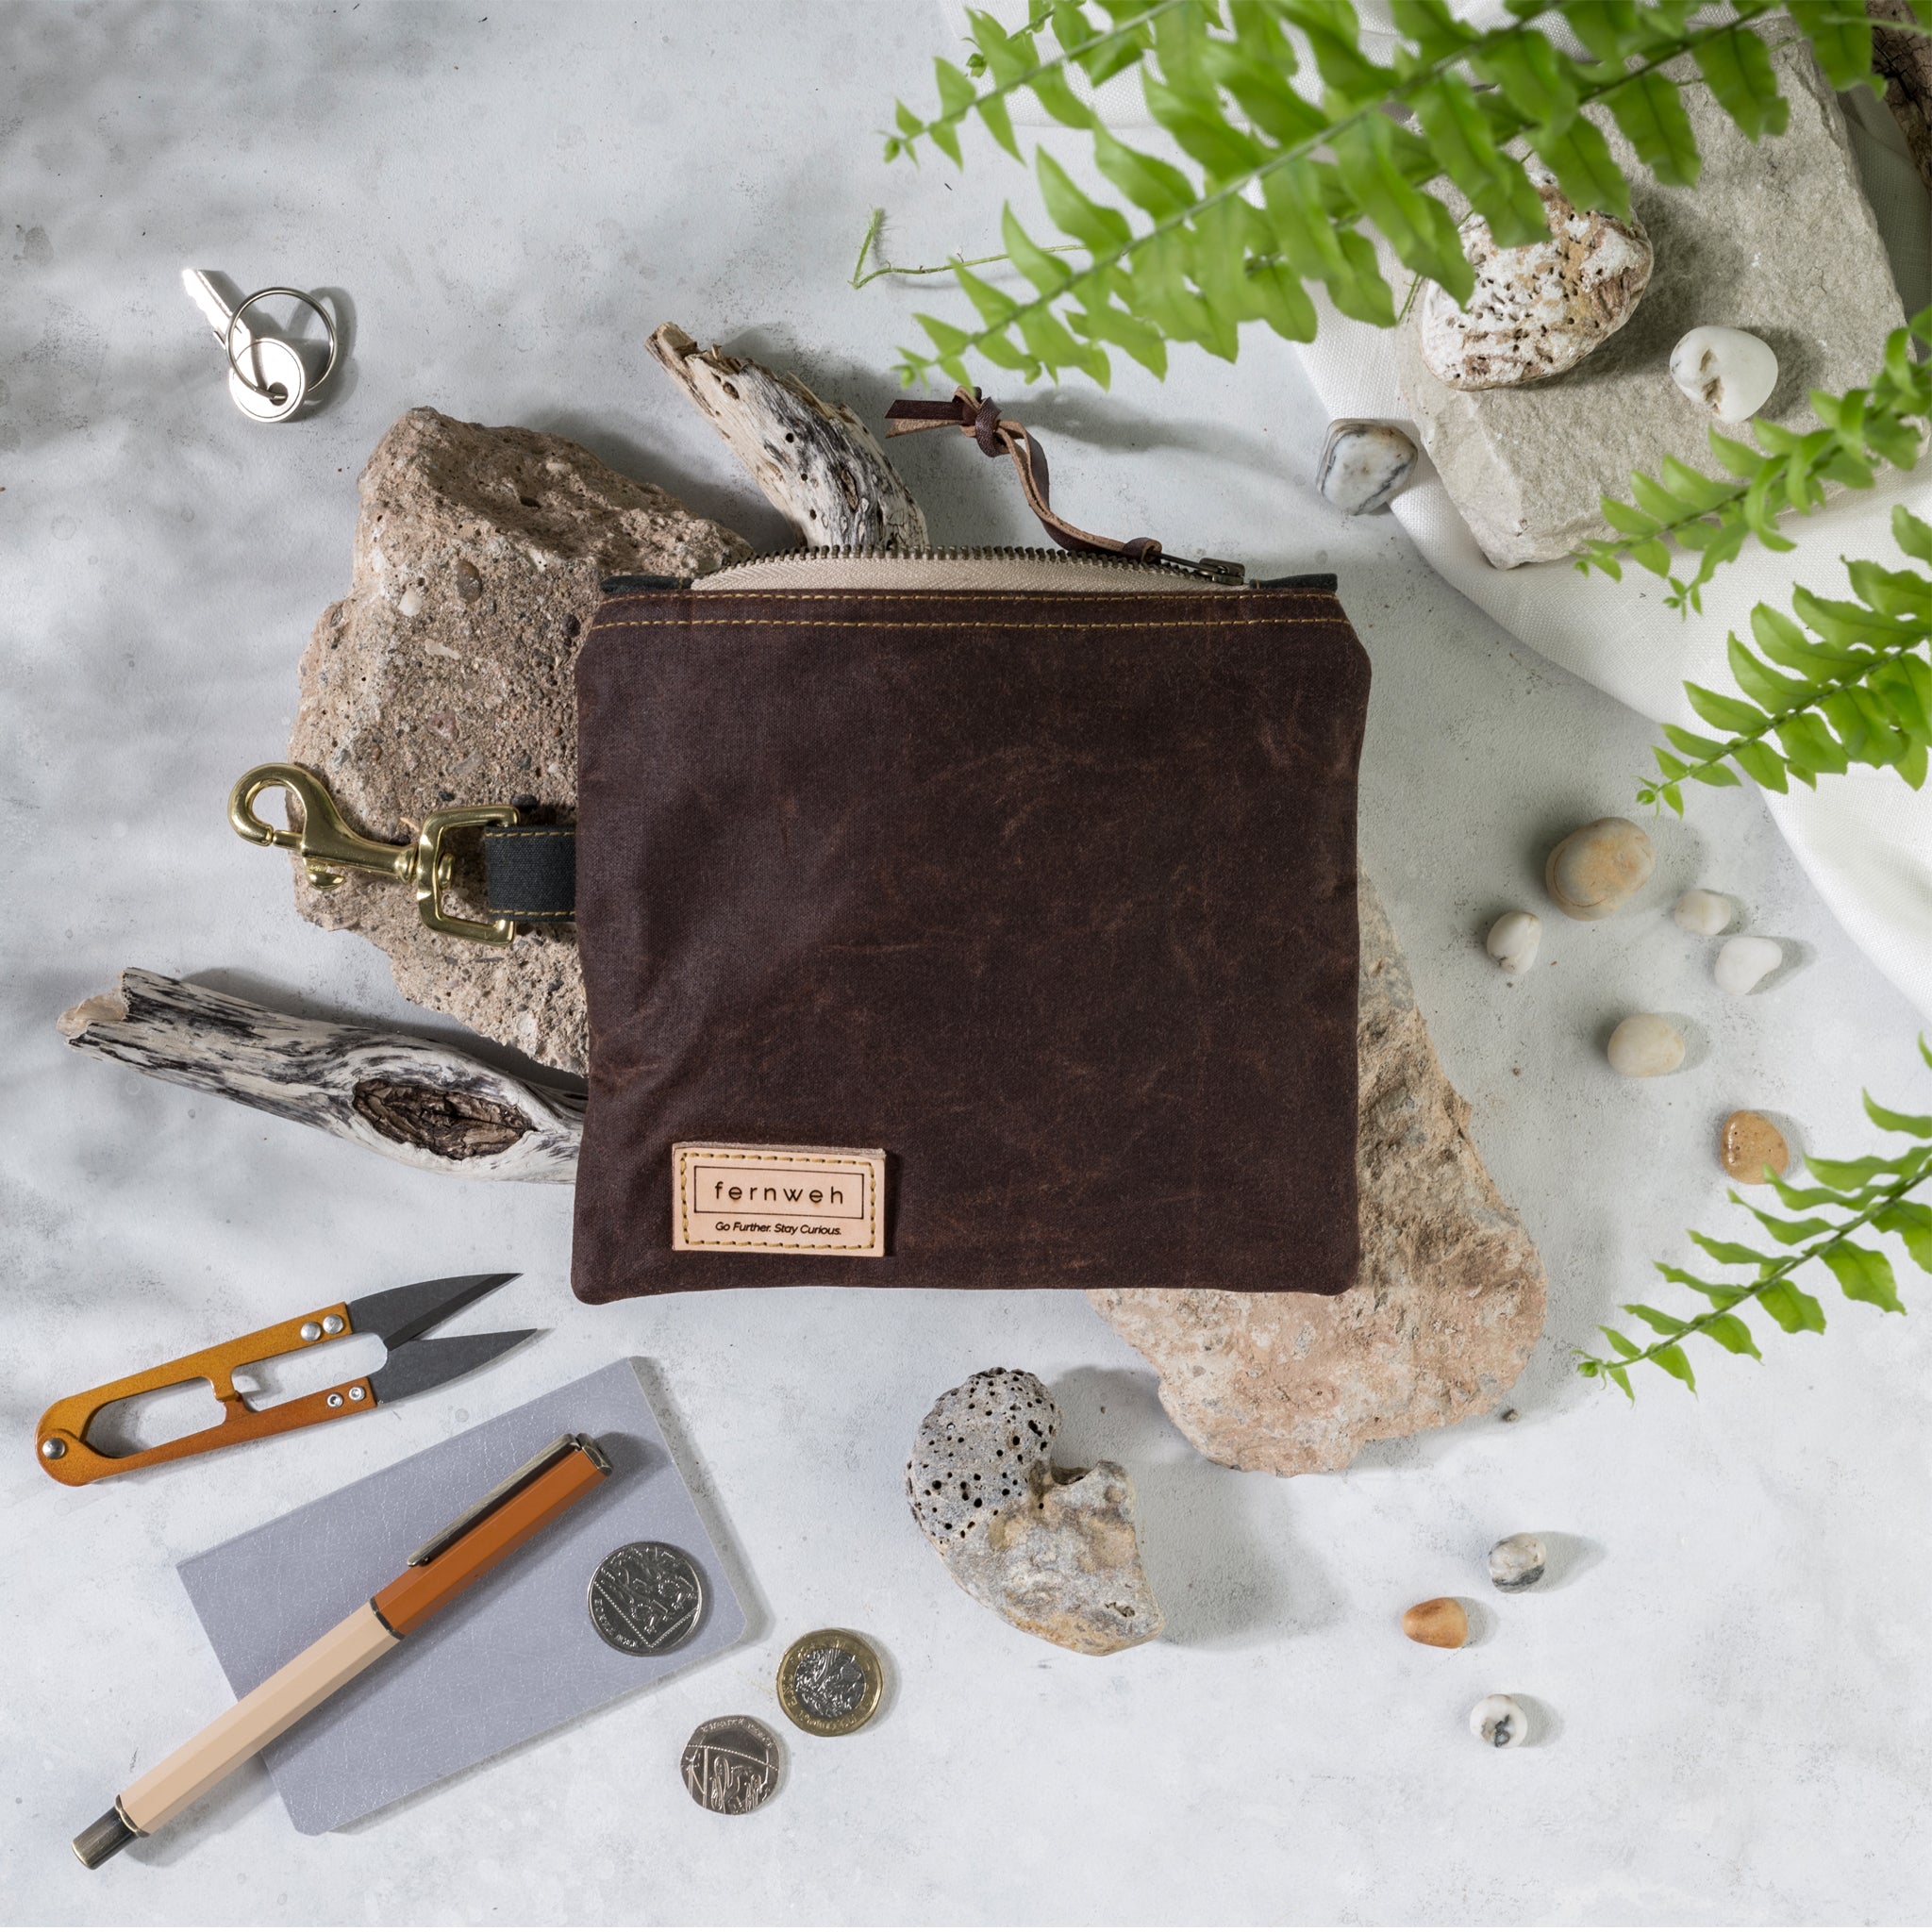 Image shows a waxed cotton canvas pouch in a rust colour, with a beige zip. The pouch sits on light coloured rocks on a white background. The zip is open. around the pouch are an array of items that would fit in the pouch, mustard snips, a mustard pen, coins, keys and small rocks